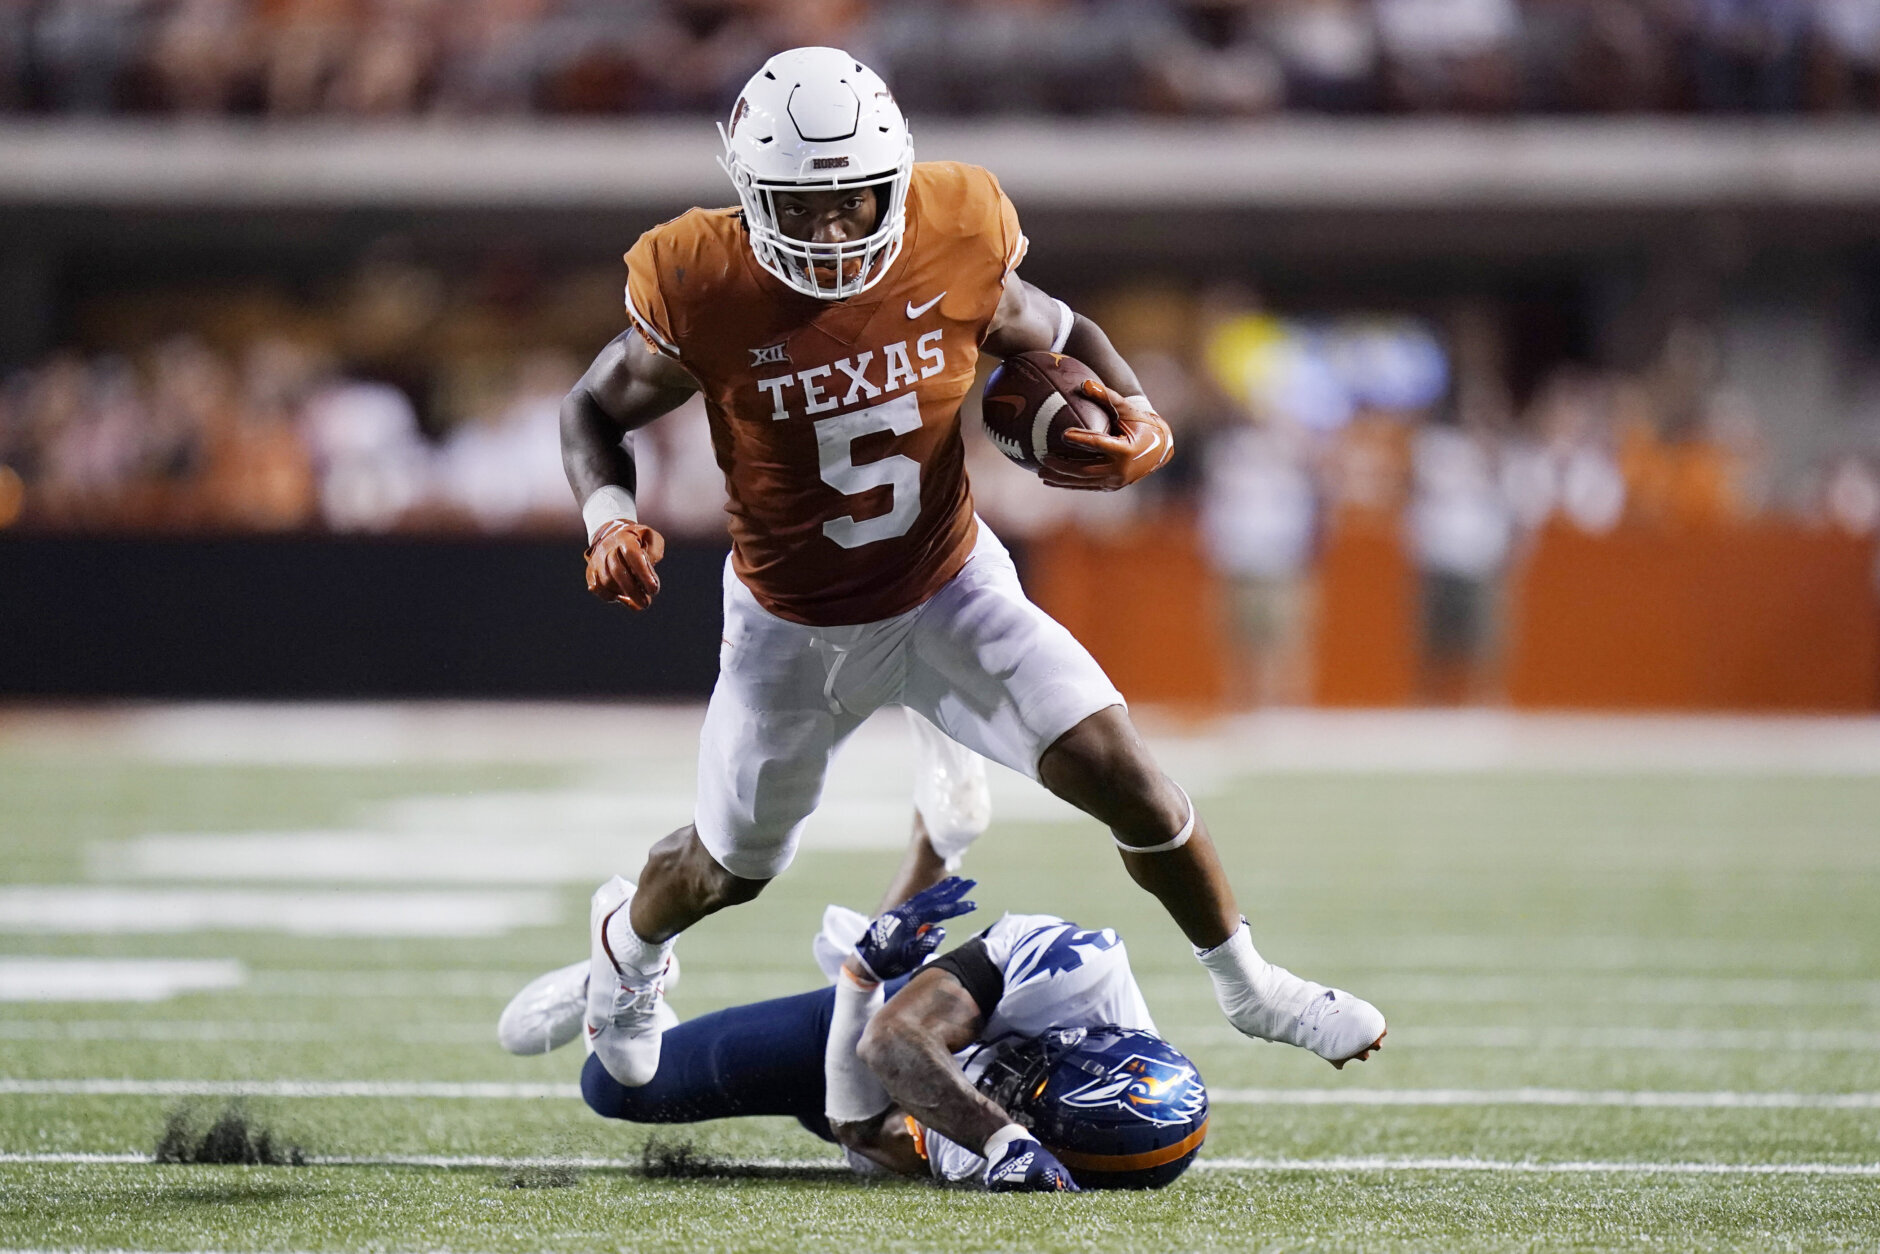 <p><strong>1e. — Bijan Robinson, RB Texas</strong></p>
<p>This would be a total luxury pick Washington can&#8217;t afford, but wow, would it be a nice addition to a team with Brian Robinson as the goal line/power back and a receiving corps of Terry McLaurin, Jahan Dotson and Curtis Samuel. Rivera has historically gone with a dual-back approach to his run game but if Bijan really is the next LaDainian Tomlinson, it&#8217;s a true test of the commitment to taking the best player available.</p>
